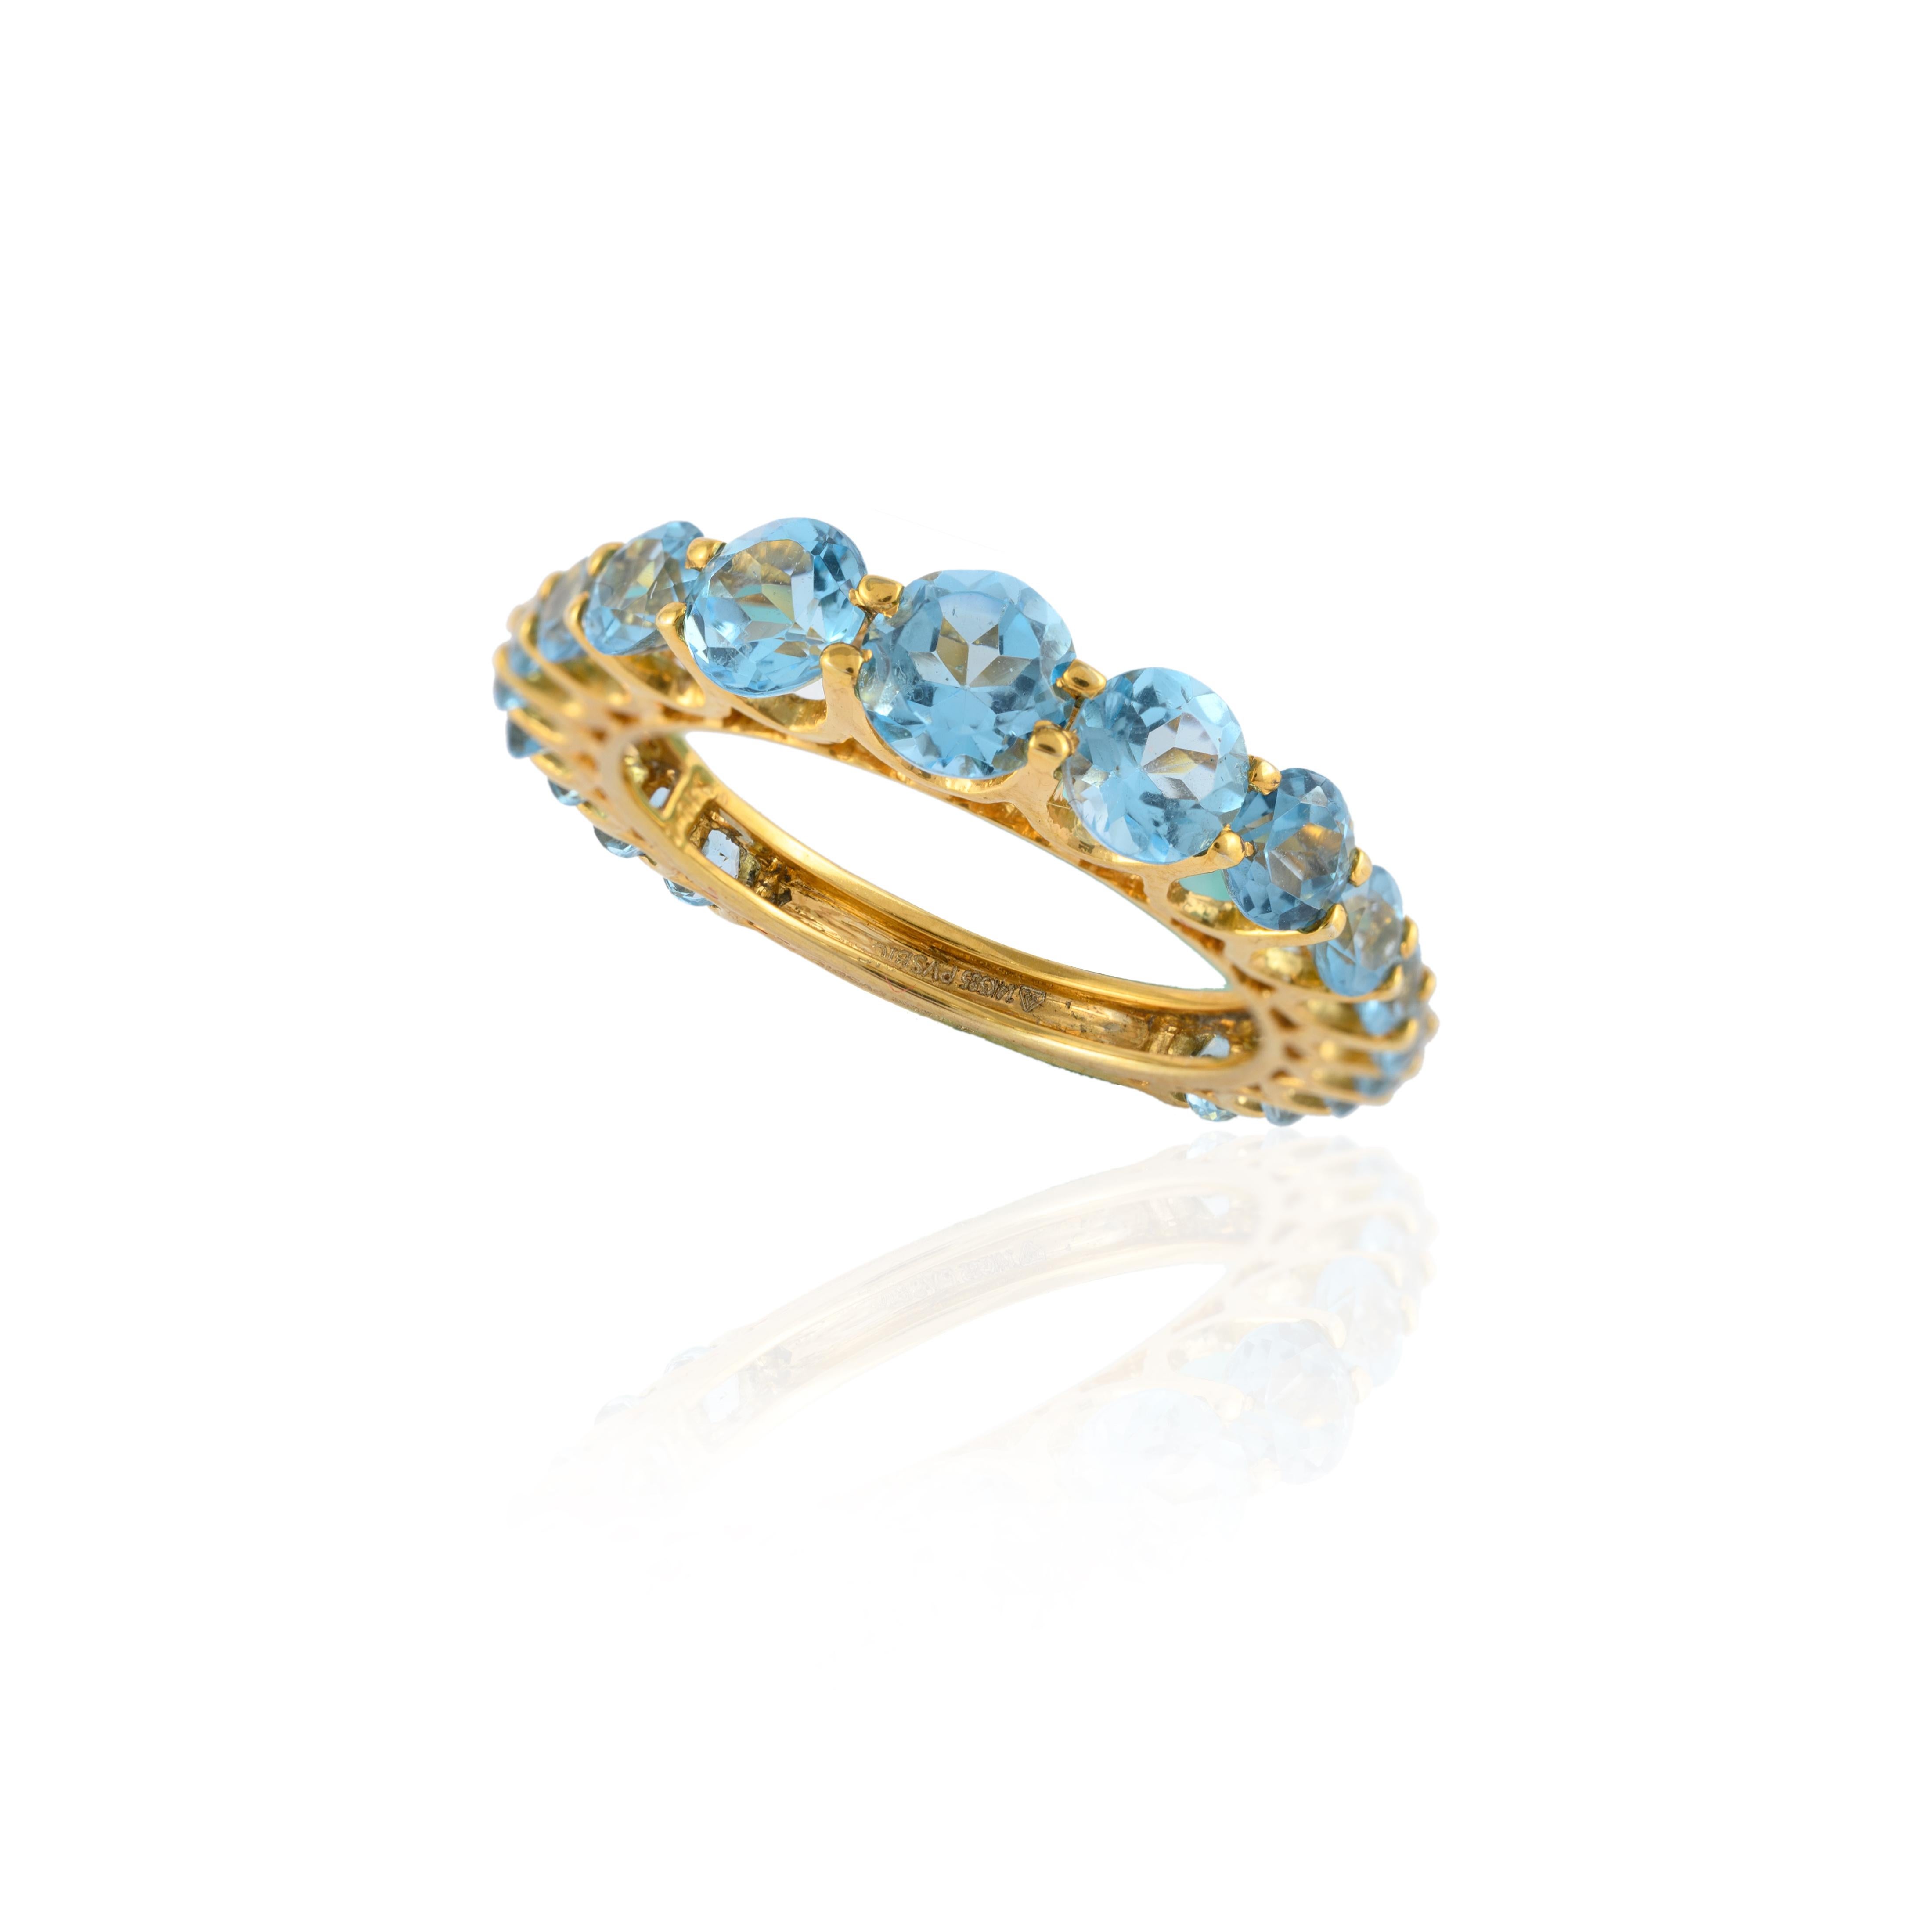 For Sale:  Unique 14k Yellow Gold 3.09 Carat Blue Topaz Half Eternity Band Ring 5